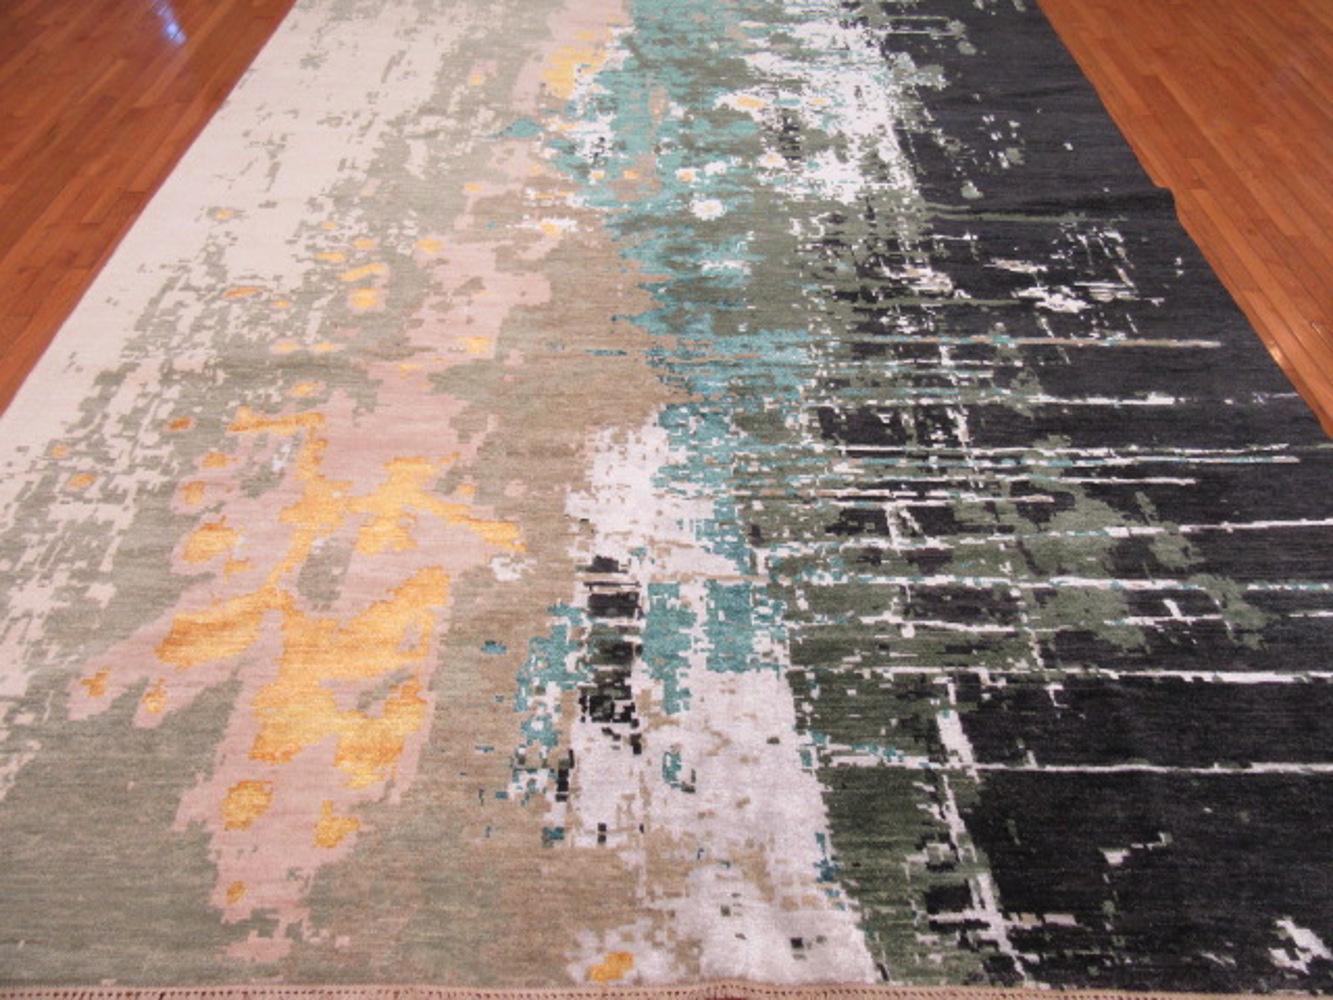 This is a large new handmade rug from India. It has a modern and contemporary design for those who desire something different. It is made with wool, bamboo silk and stabile dyes. It measures 9' x 12'.